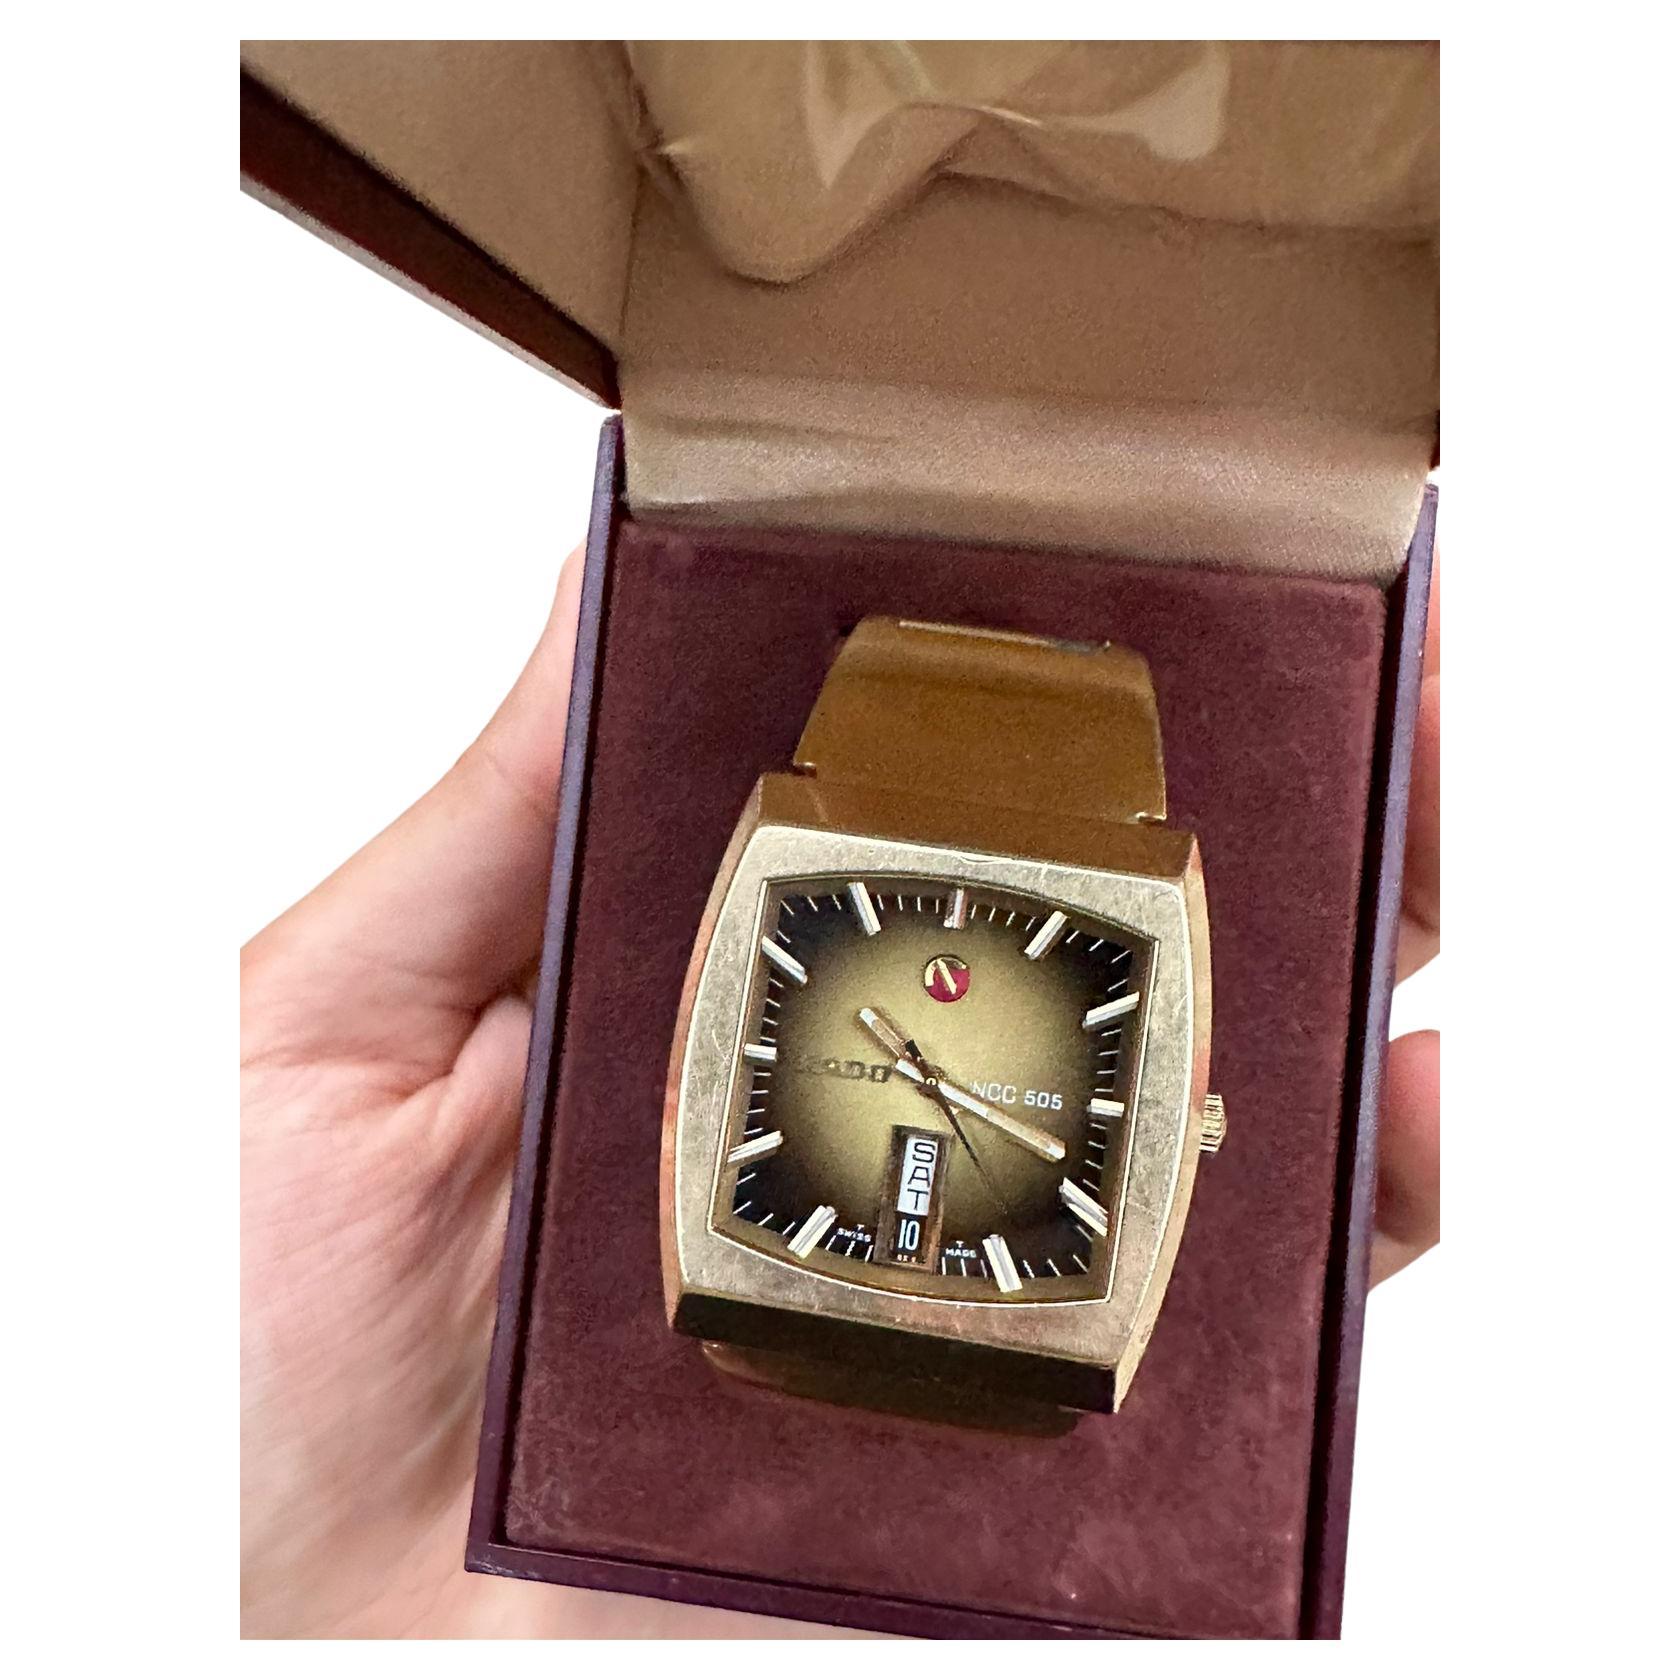 Rado Ncc 505 Automatic Gold Plated Rare Dial Boxed